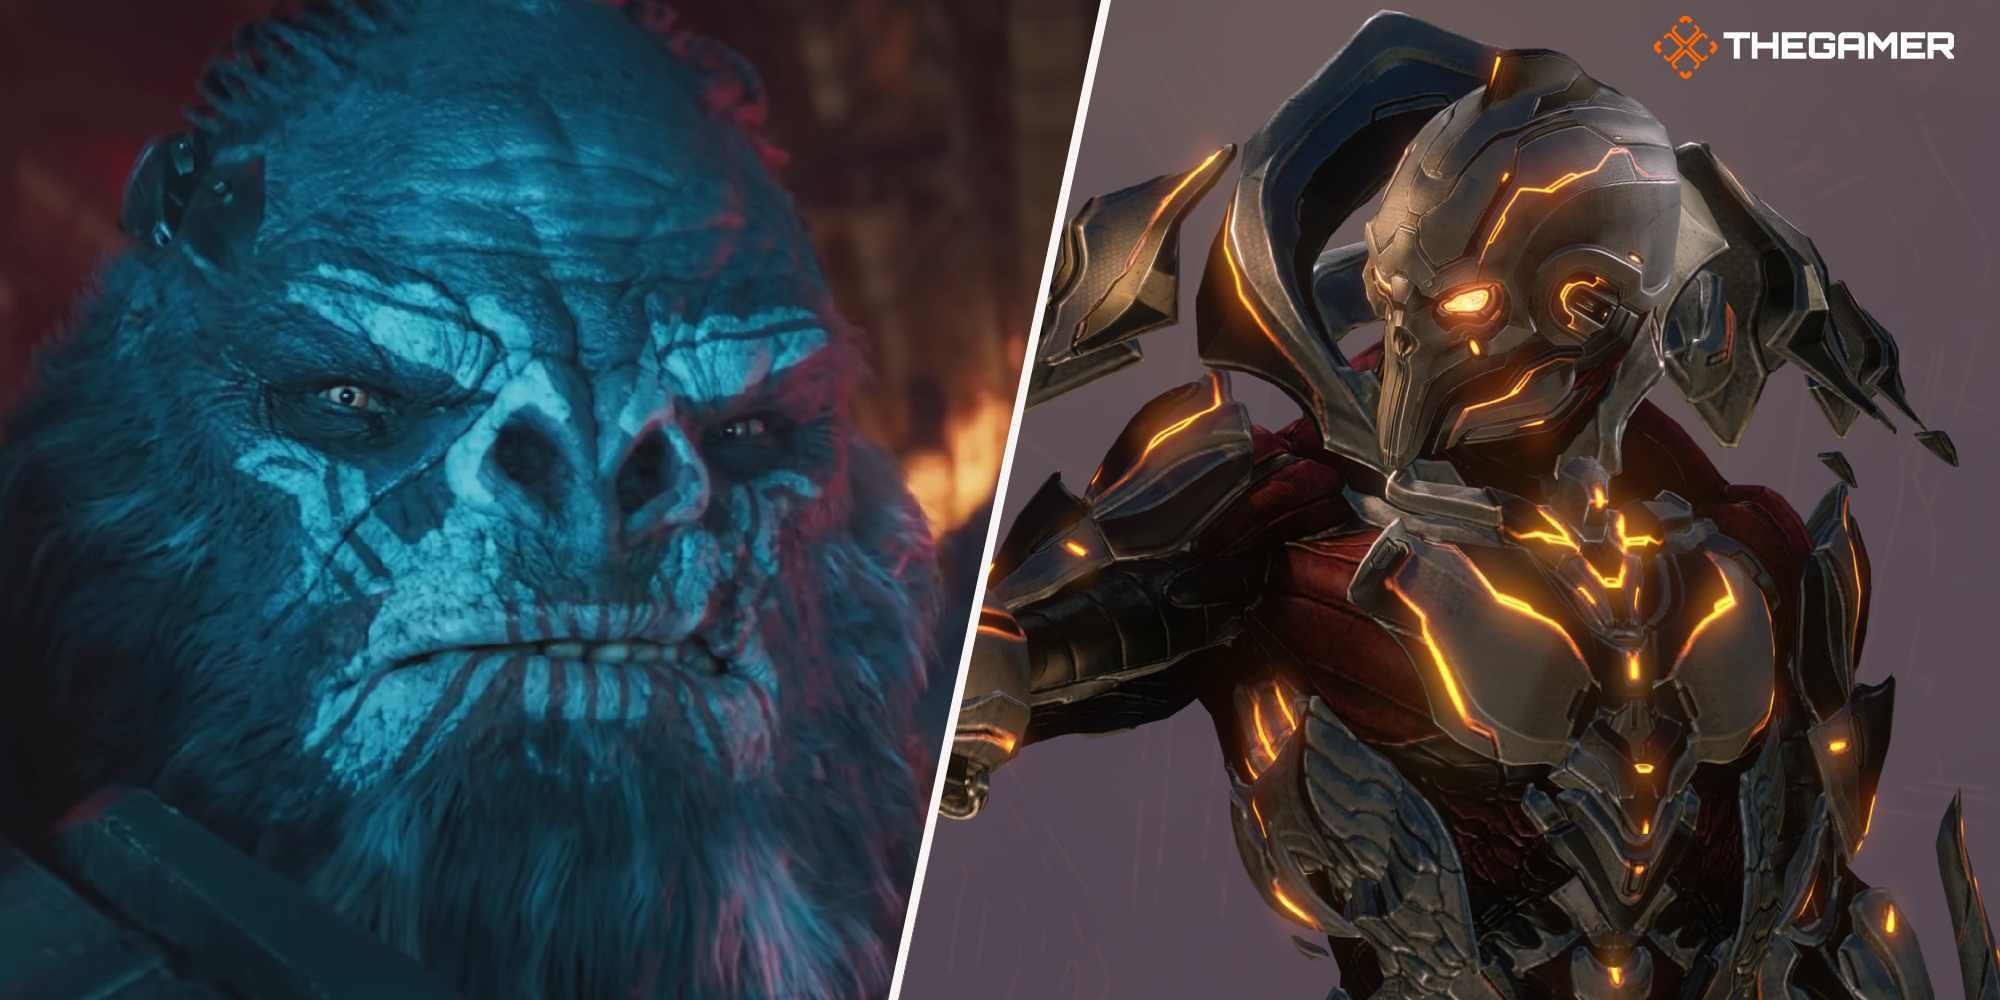 Split image of Atriox and Didact from the Halo series